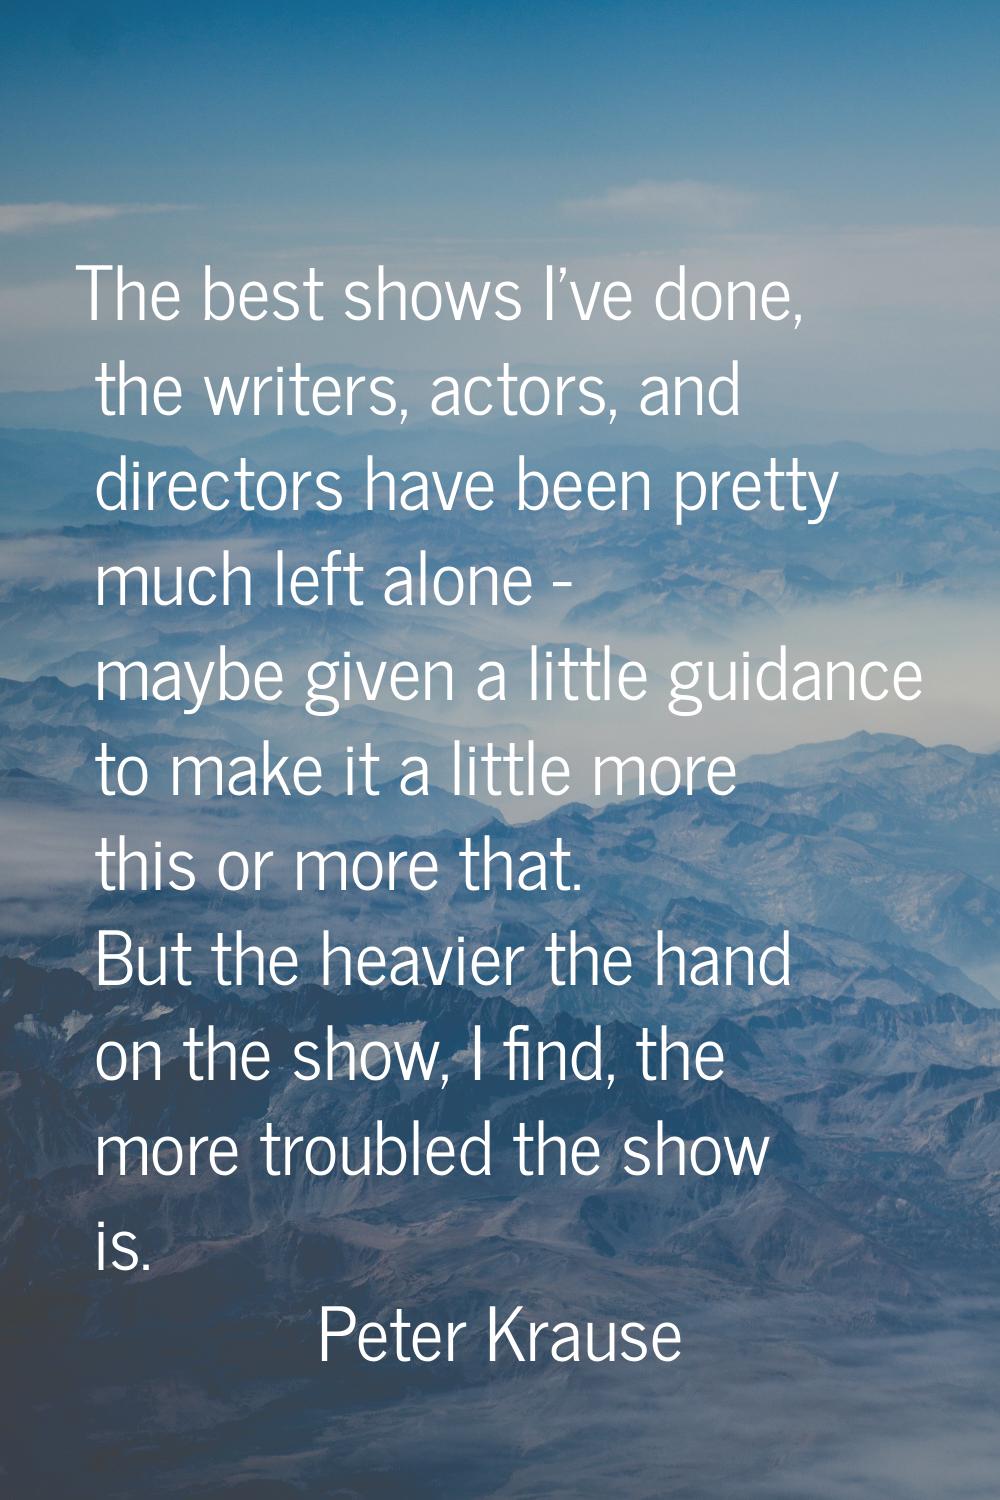 The best shows I've done, the writers, actors, and directors have been pretty much left alone - may